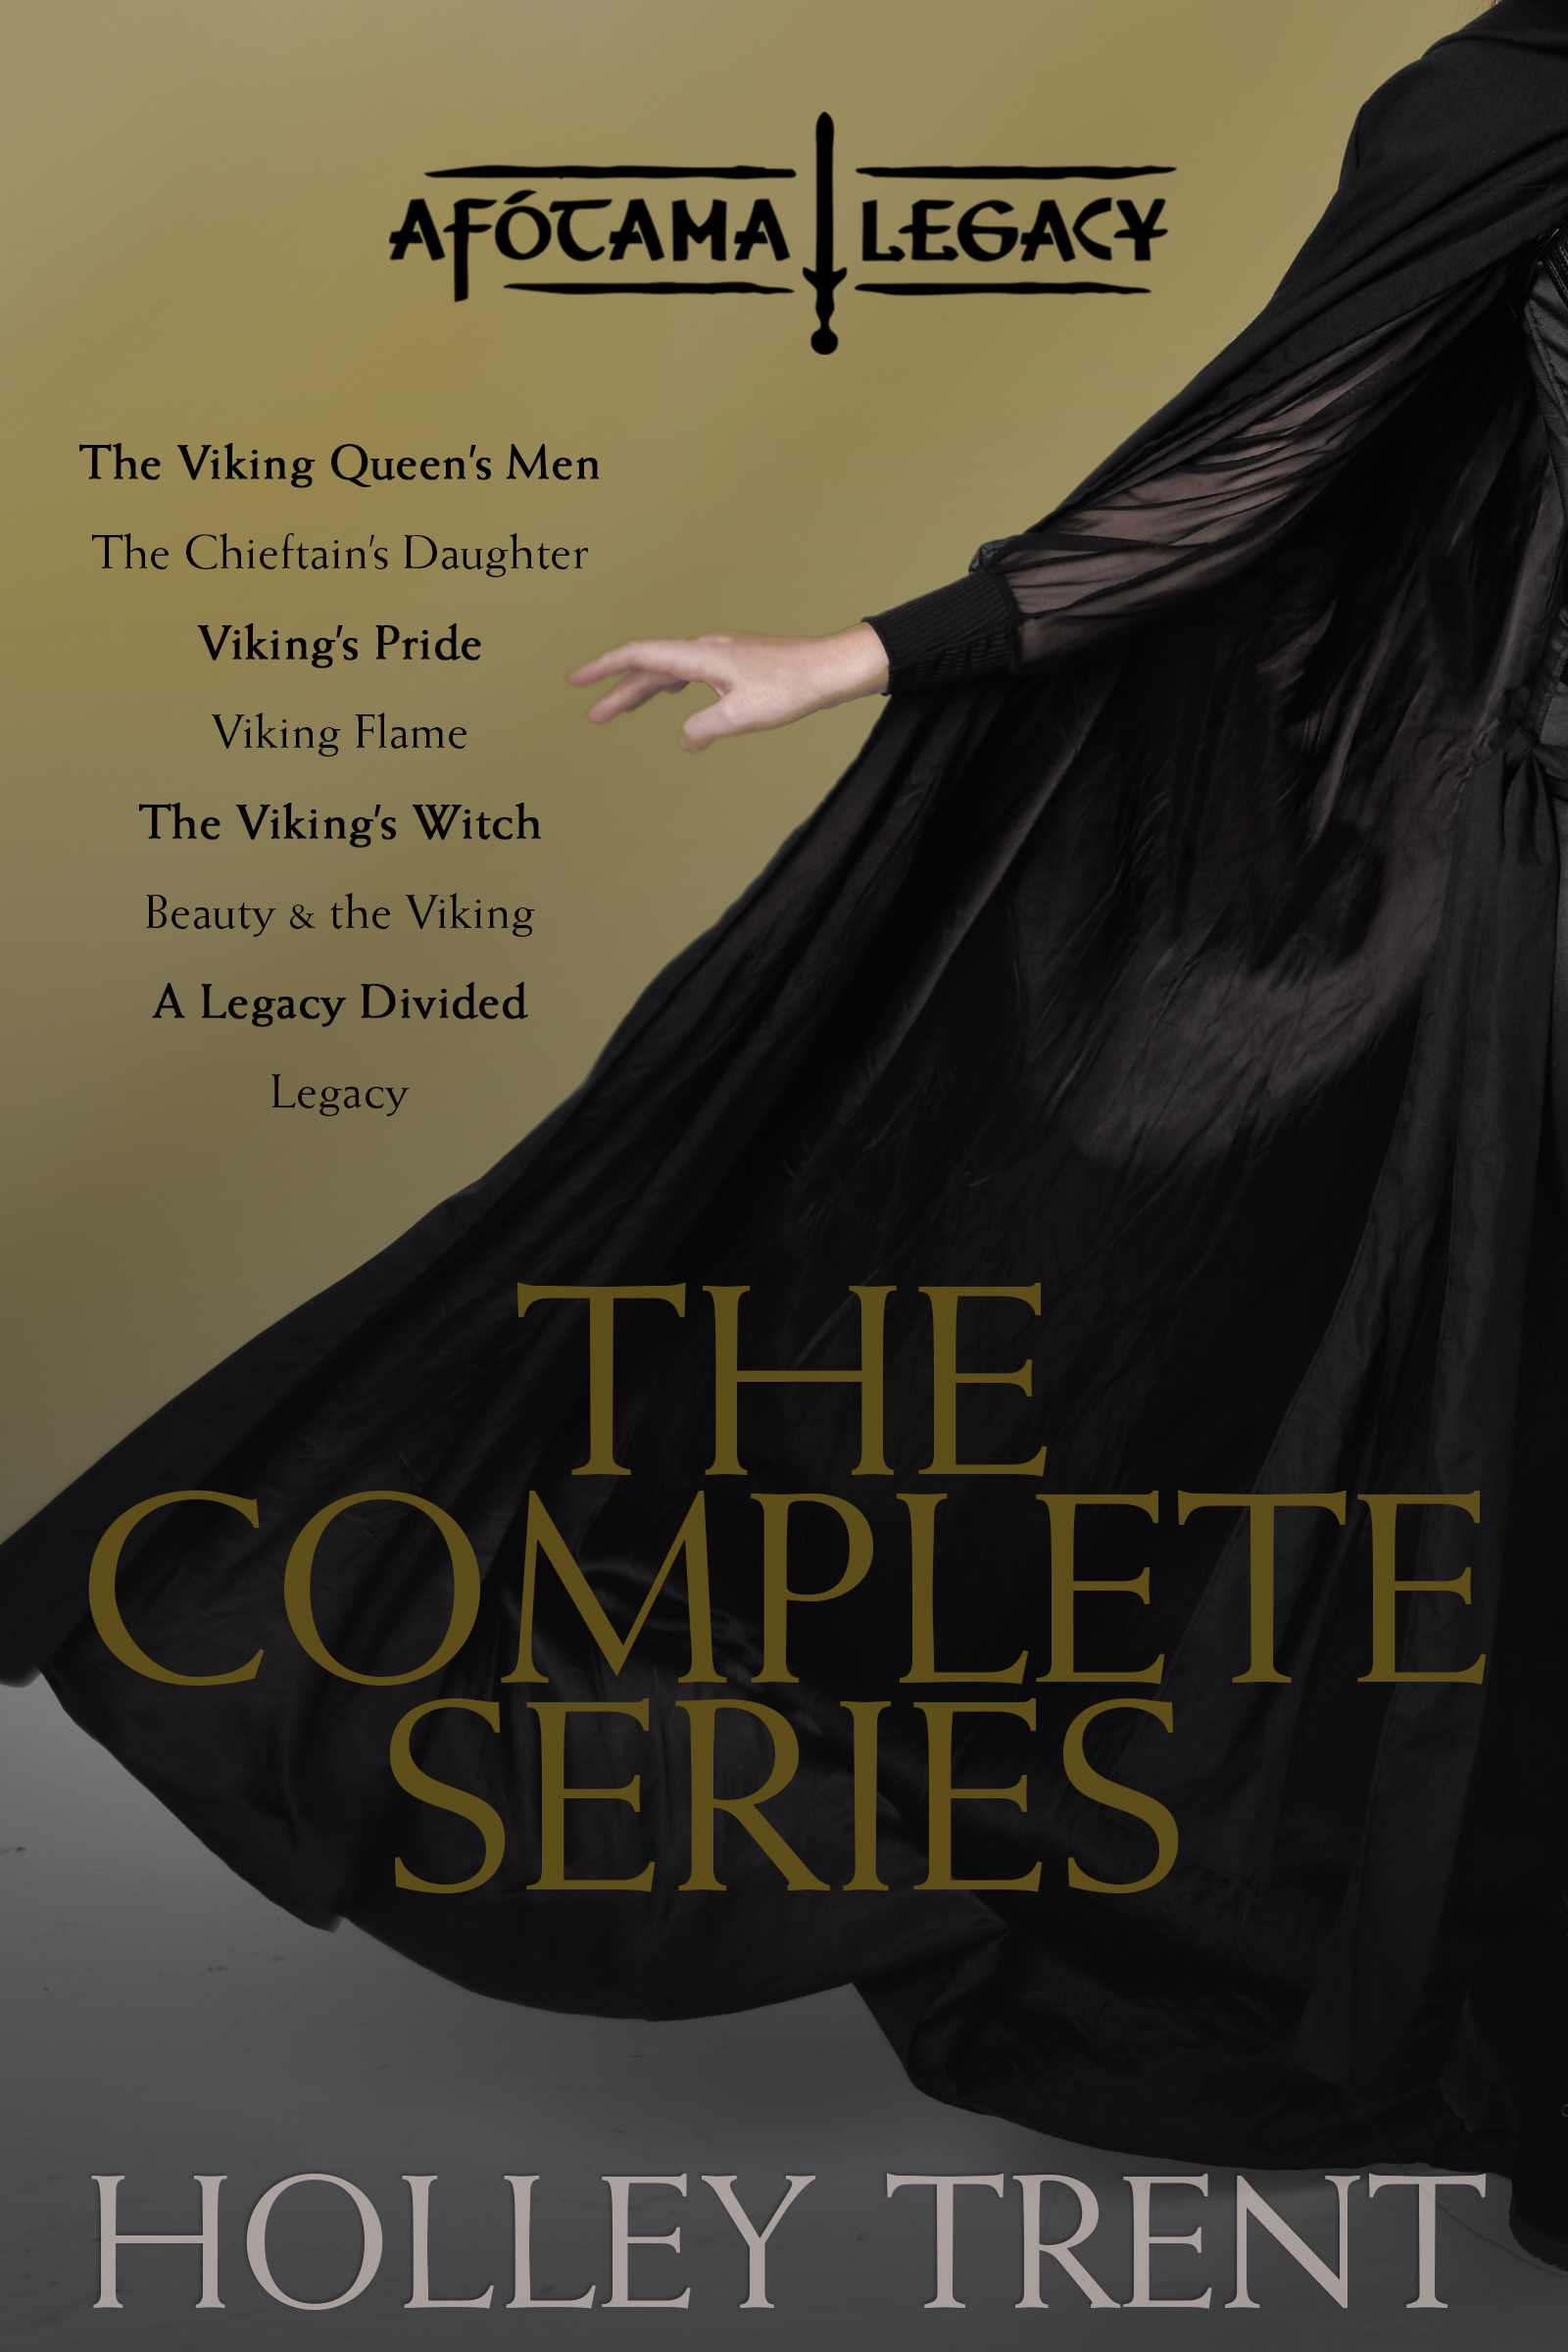 Cover of The Afótama Legacy complete series cover. There is a woman dressed in all black sweeping her cloak dramatically out to the side. The list of series stories are printed beside her.